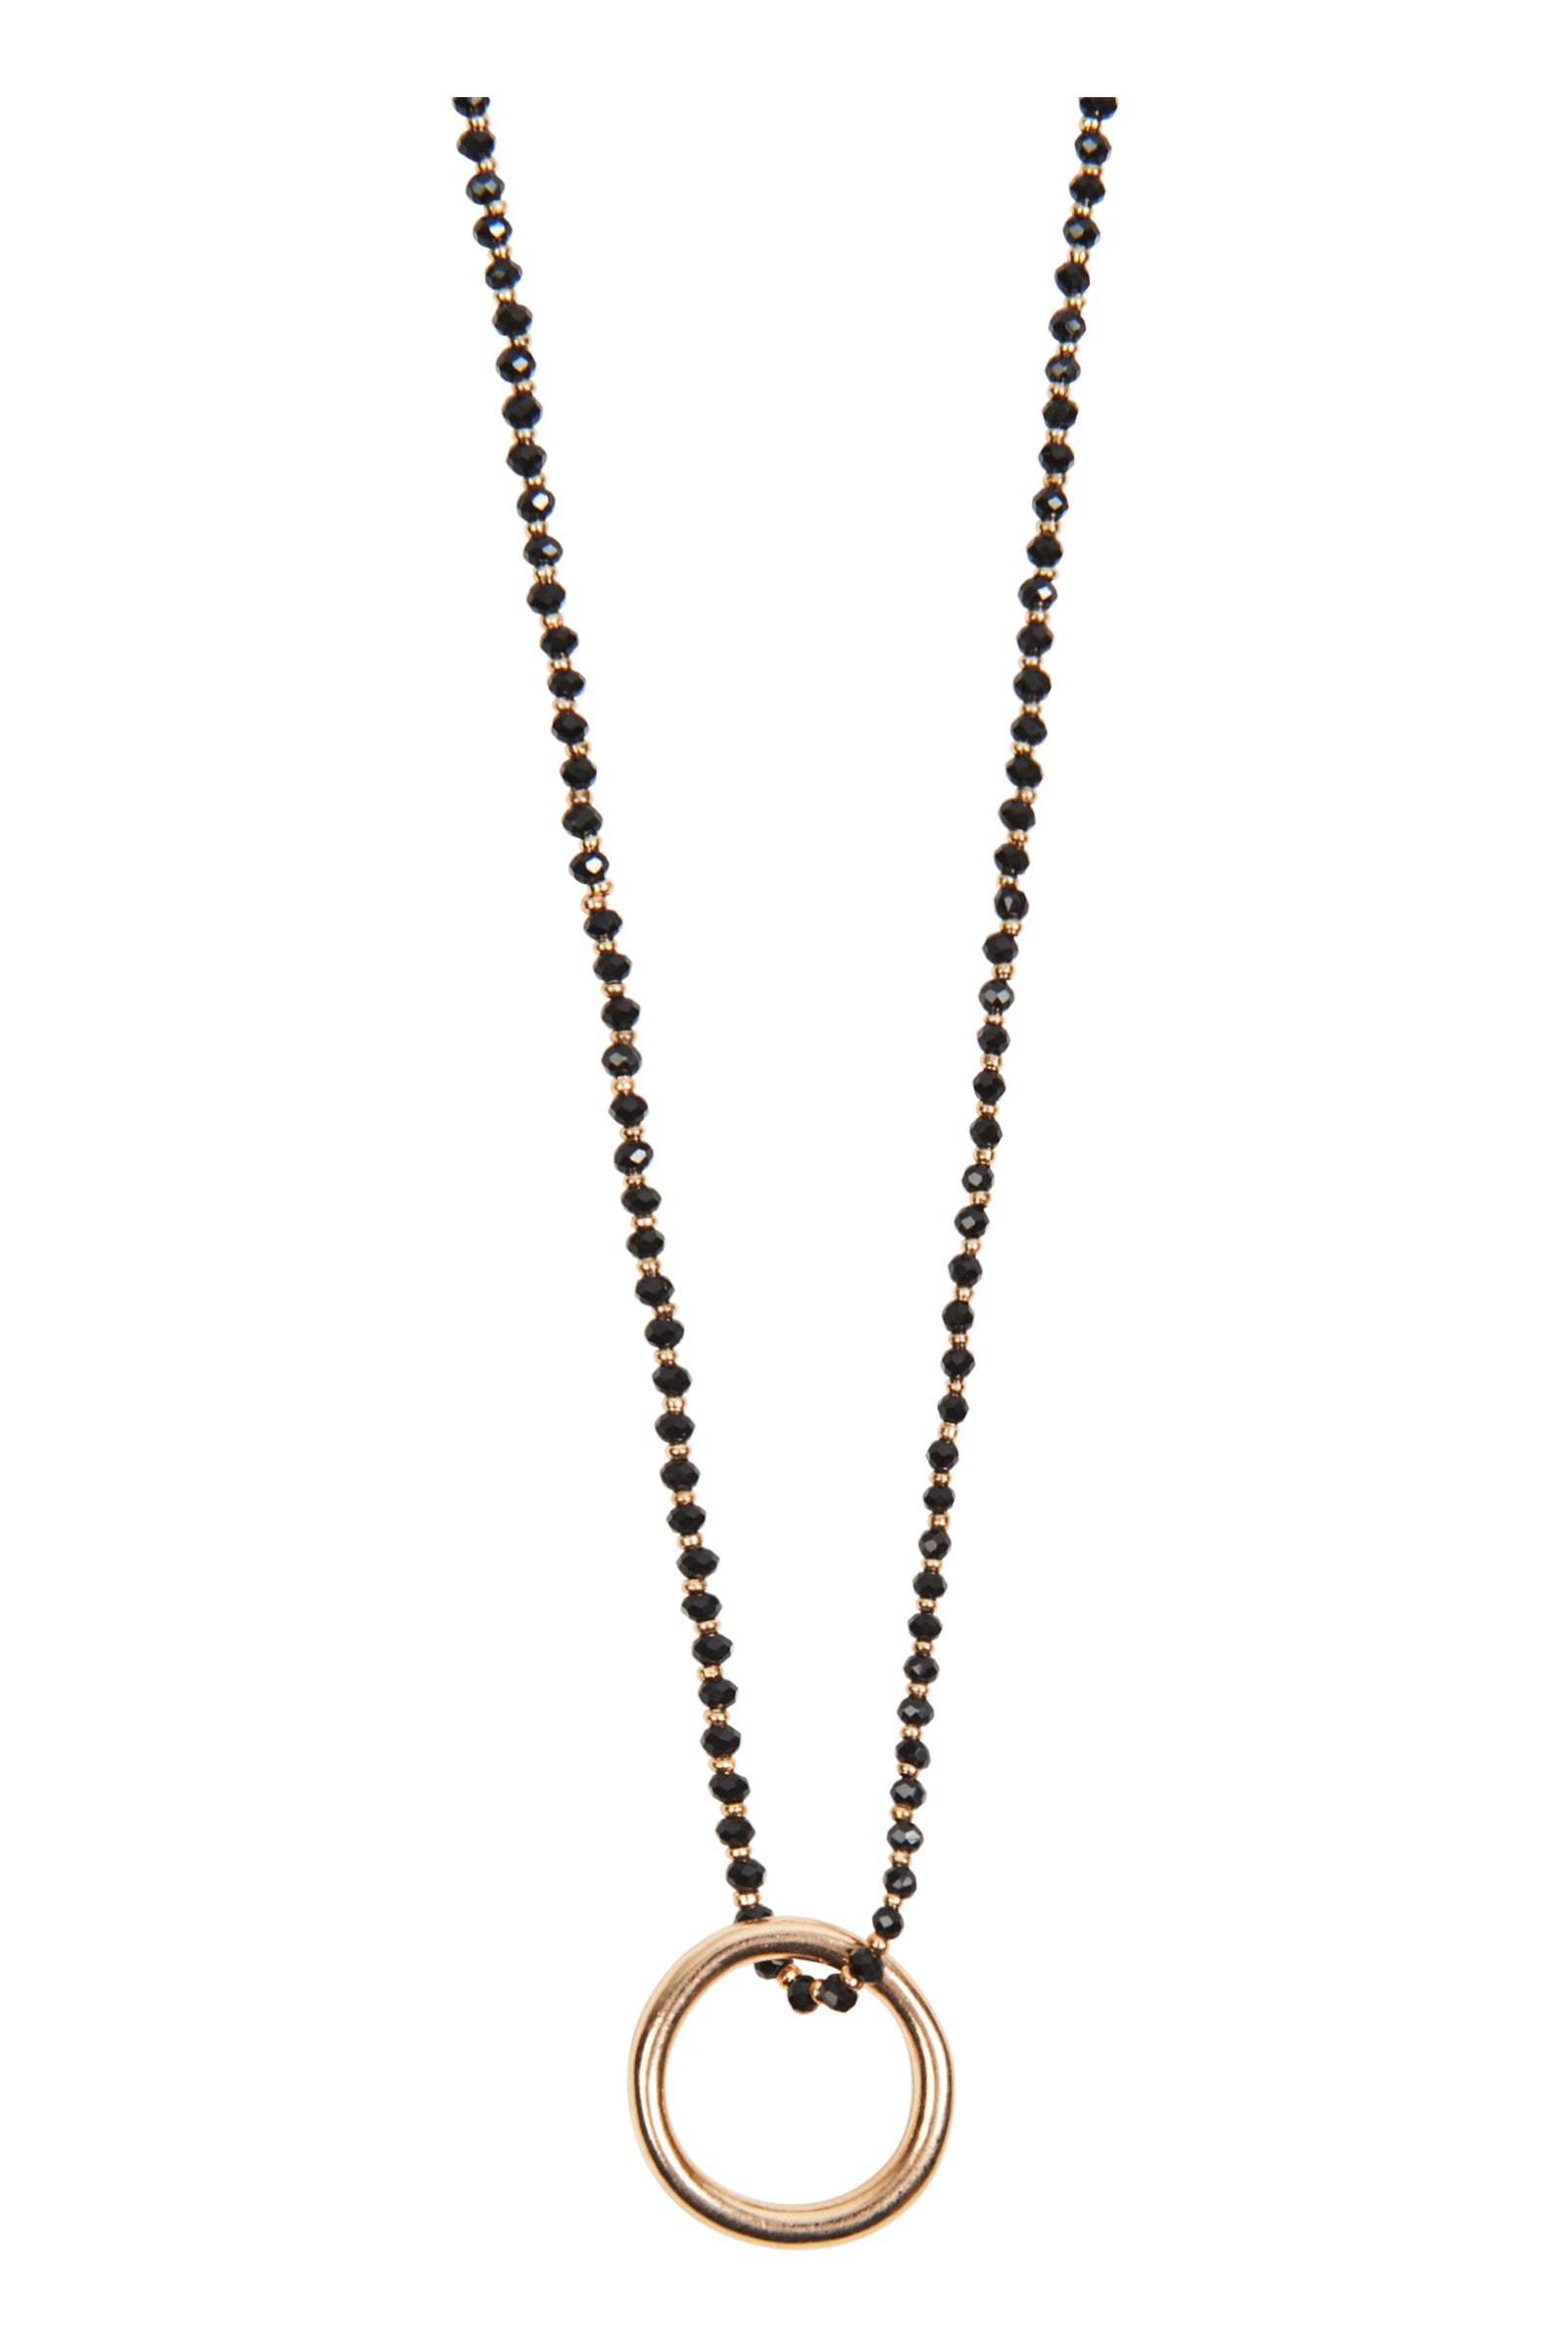 Irula Necklace - Gold Loop - eb&ive Necklace